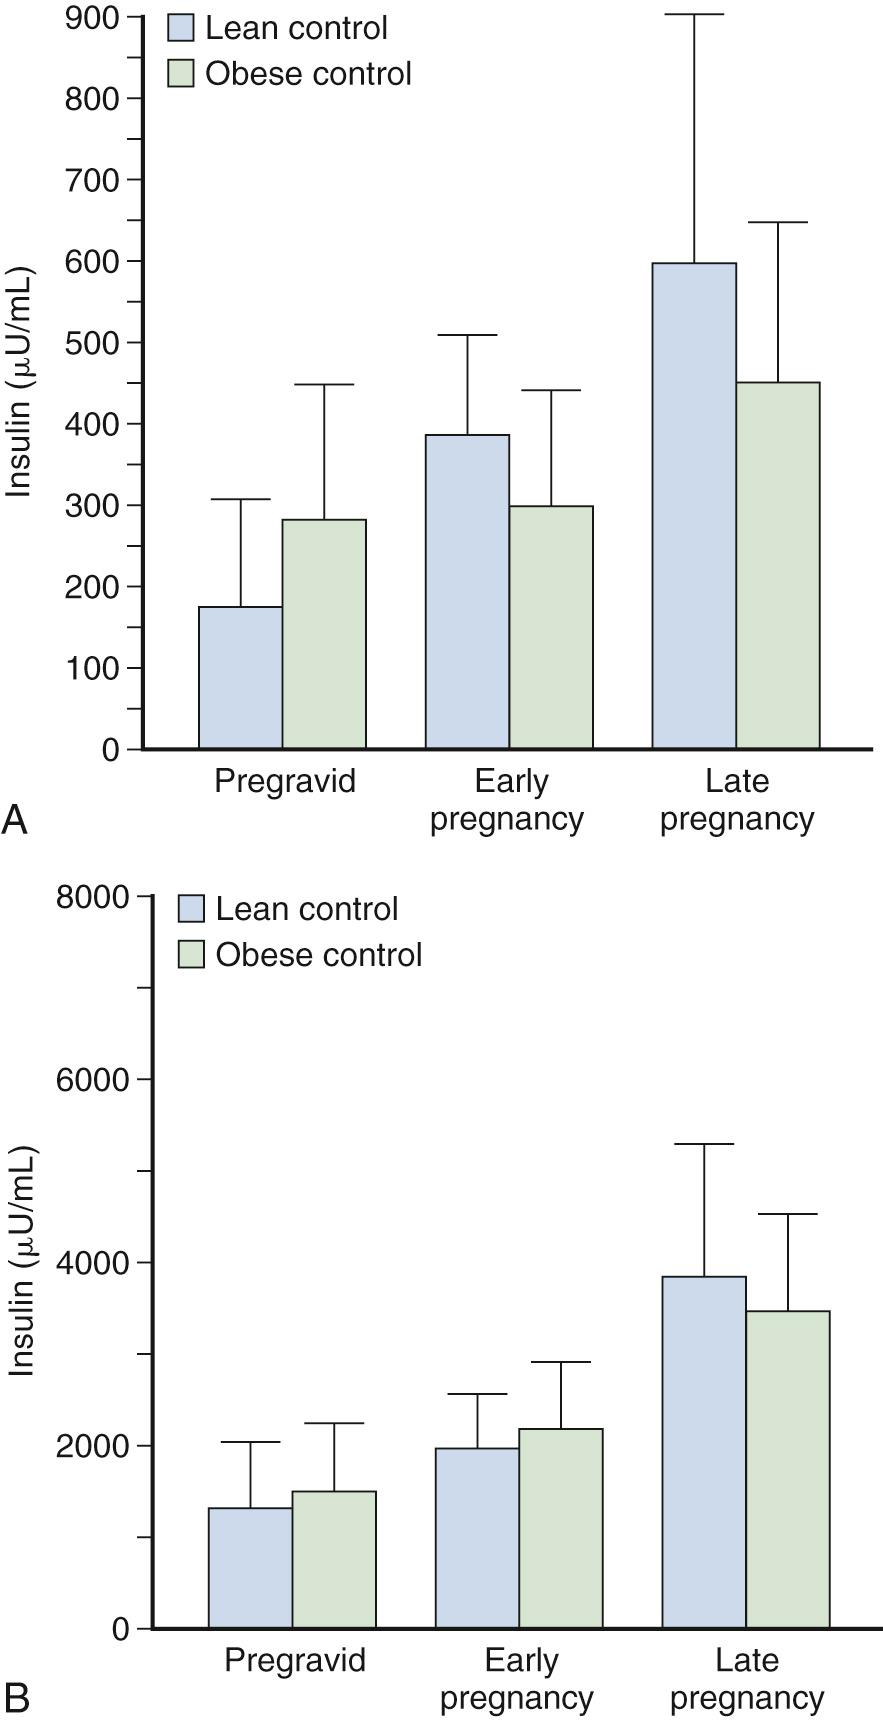 Fig. 45.3, Longitudinal Increase in Insulin Response to an Intravenous Glucose Challenge in Lean and Obese Women With Normal Glucose Tolerance: Pregravid and Early and Late Pregnancy.